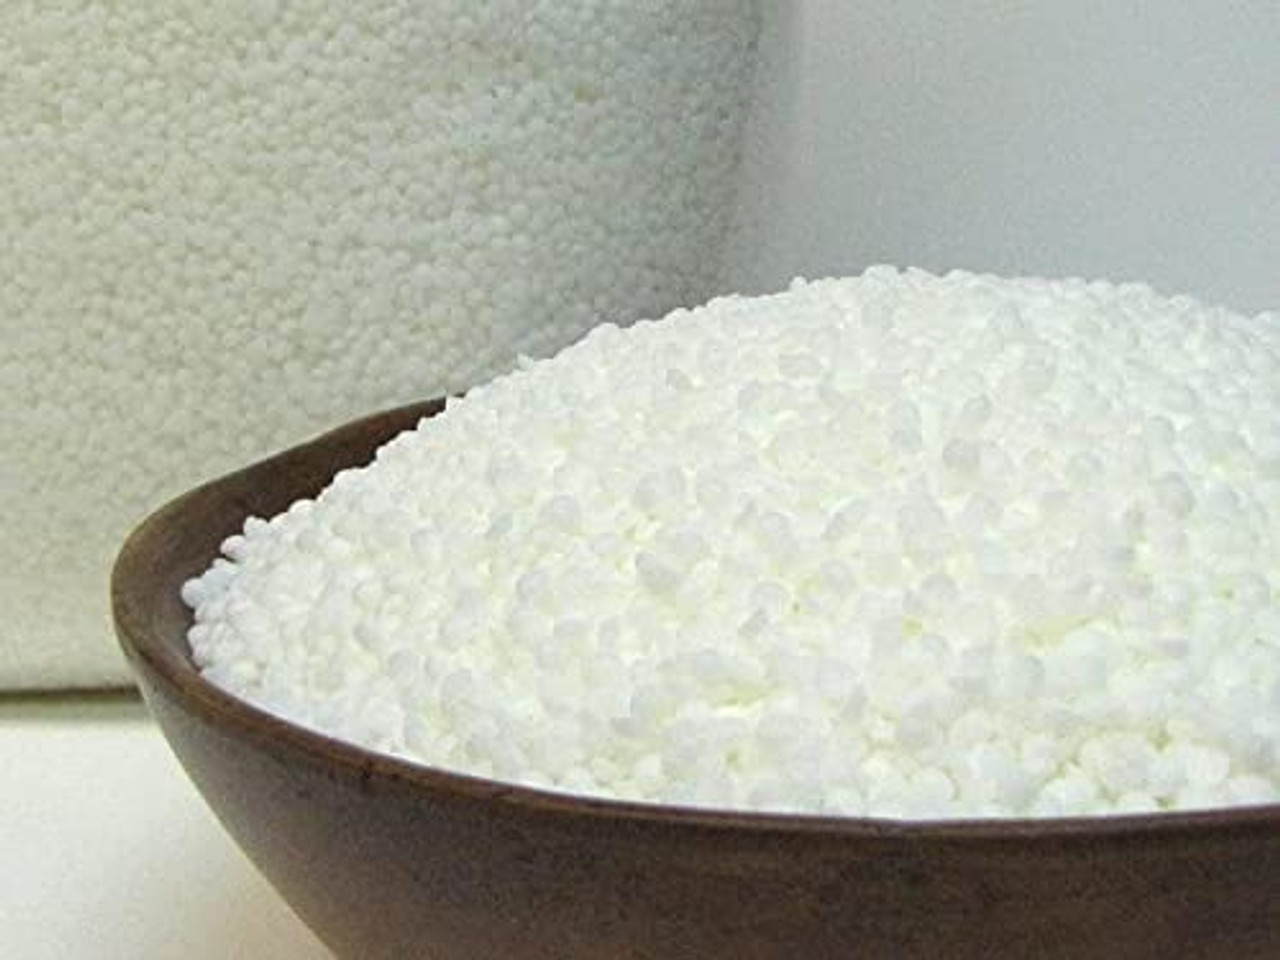  American Soy Organics- Freedom So Wax Beads for Melt Making –  Microwavable Soy Wax Beads – Premium Soy Melt Making Supplies (5-Pound Bag)